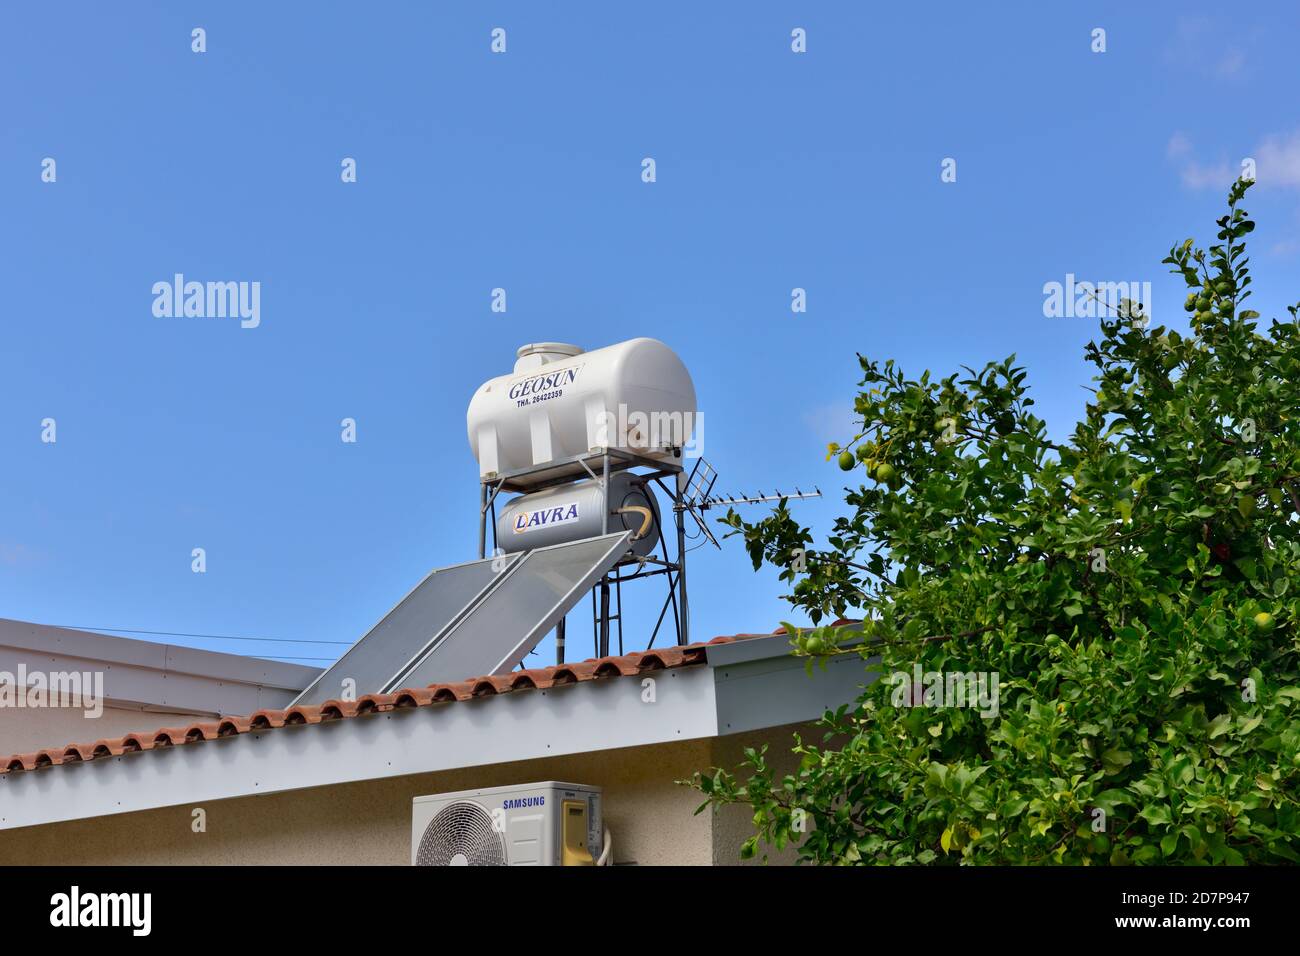 House with solar thermal heating hot water storage on the roof along with TV aerial, next to lemon tree, Cyprus Stock Photo